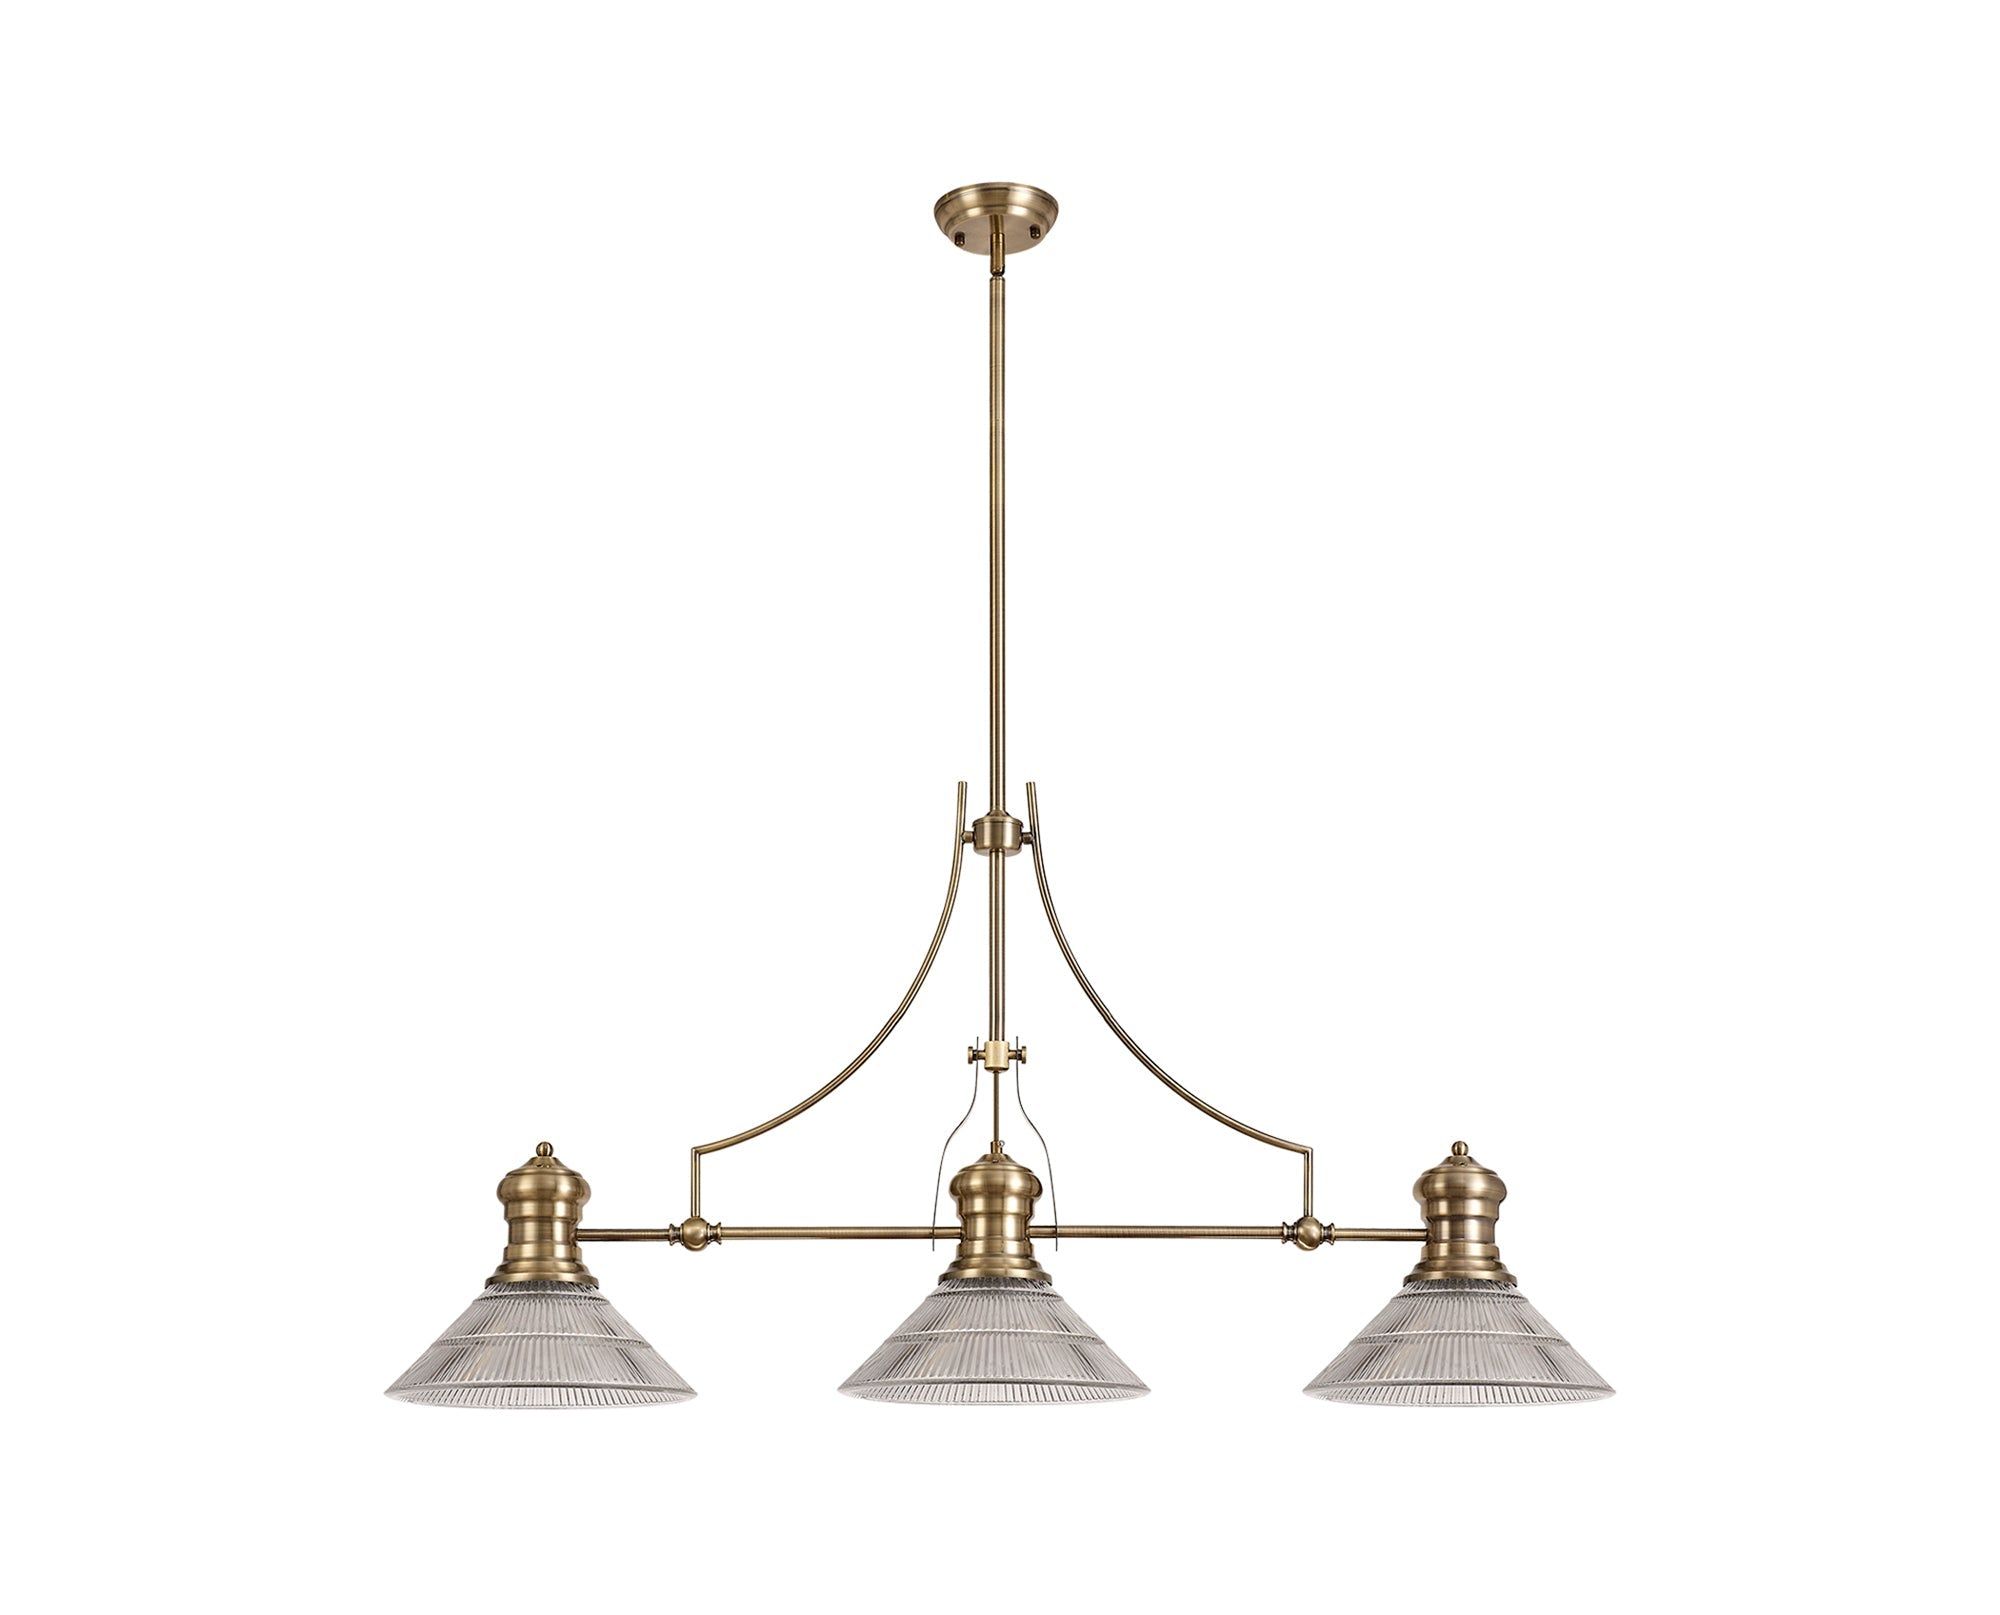 Savannah 3 Light Linear Pendant E27 With 30cm Cone Glass Shade, Antique Brass, Clear